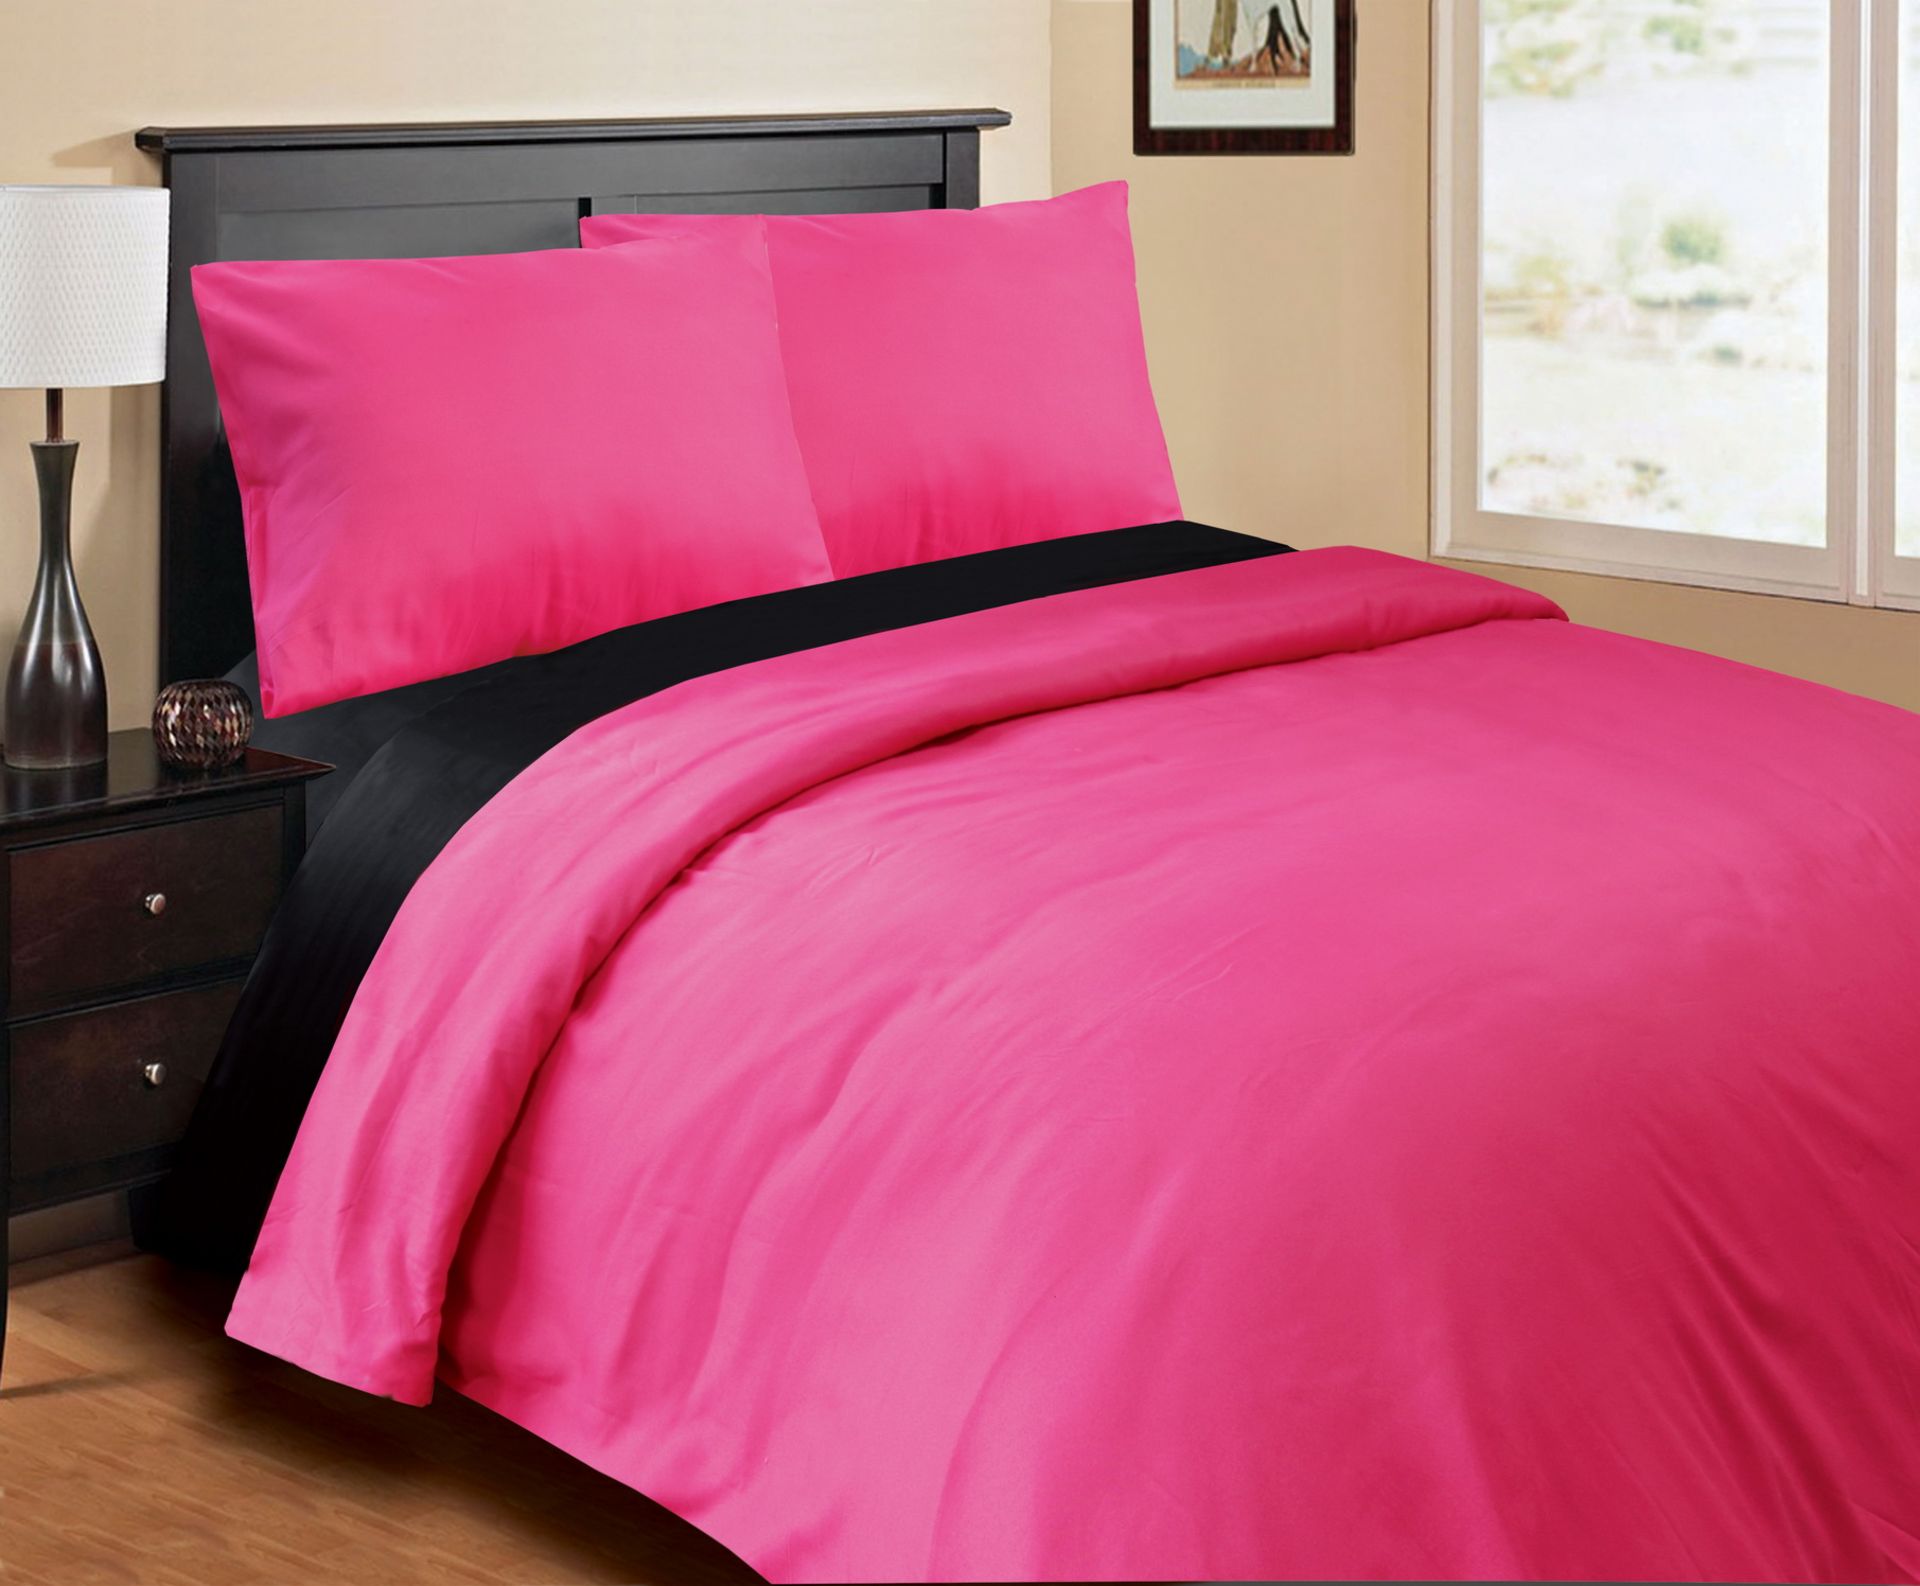 10 x Single Luxury Comfytex Reversible Bed Set Pink/Black 135x200cm (Delivery Available)